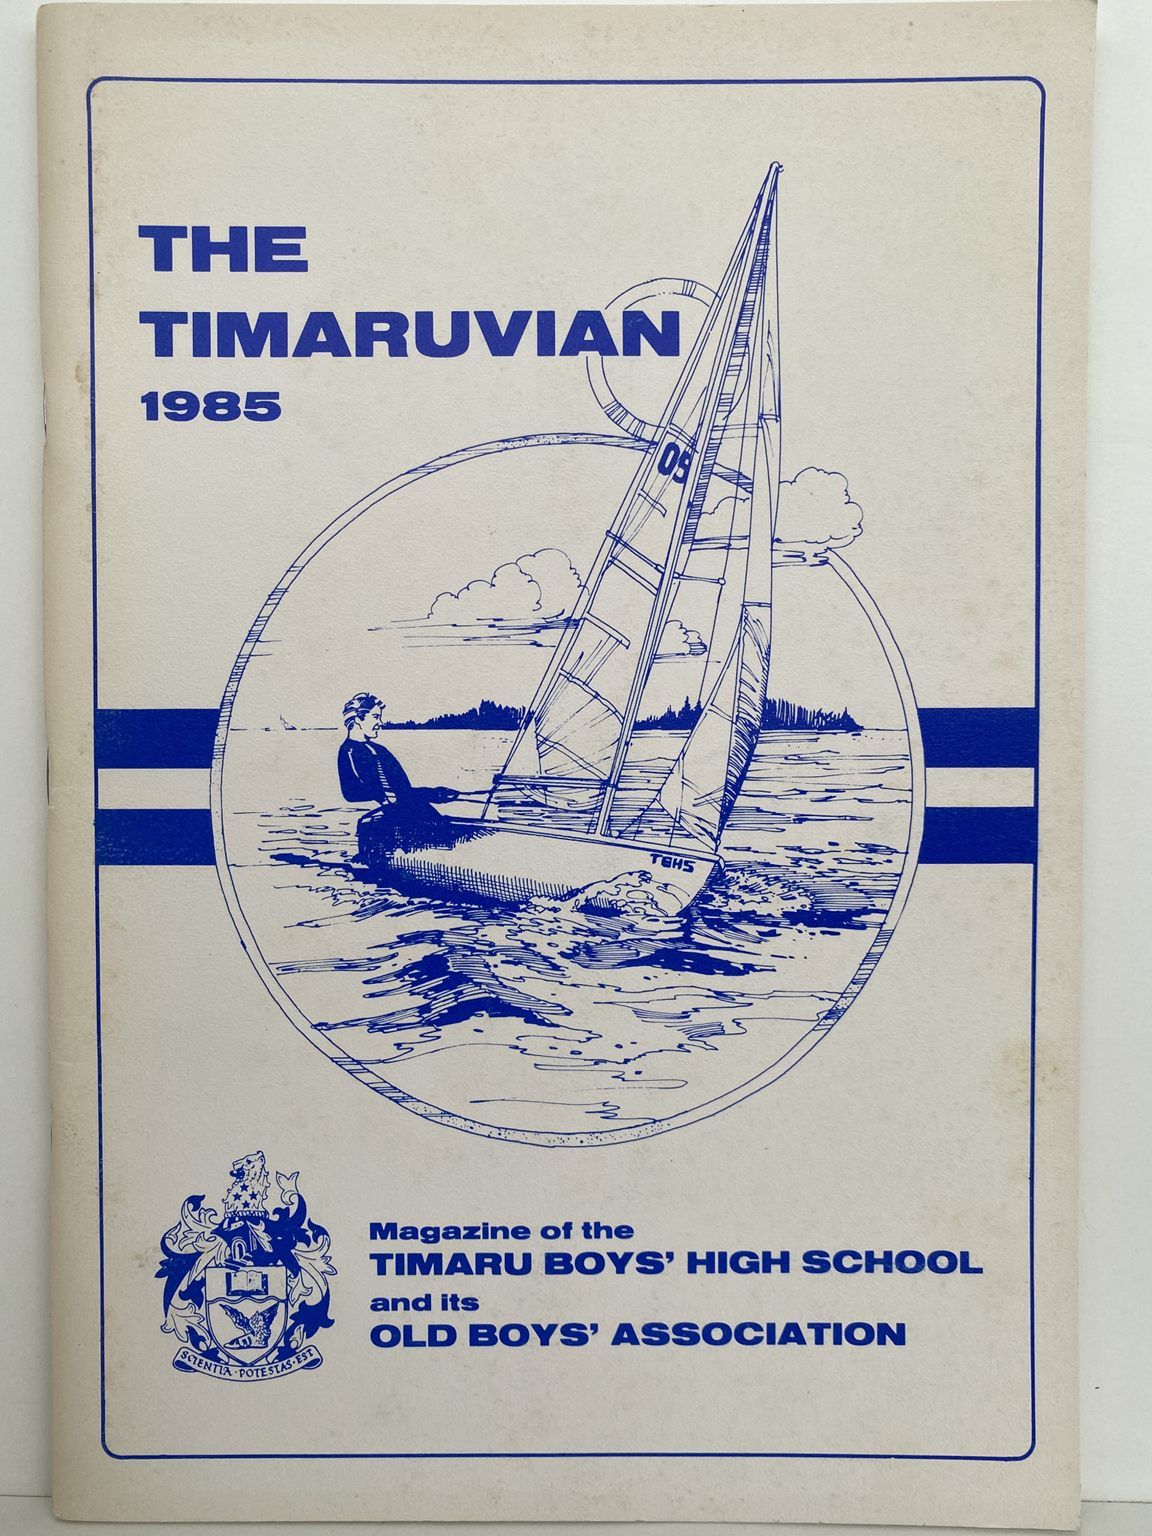 THE TIMARUVIAN: Magazine of the Timaru Boys' High School and its Old Boys' Association 1985